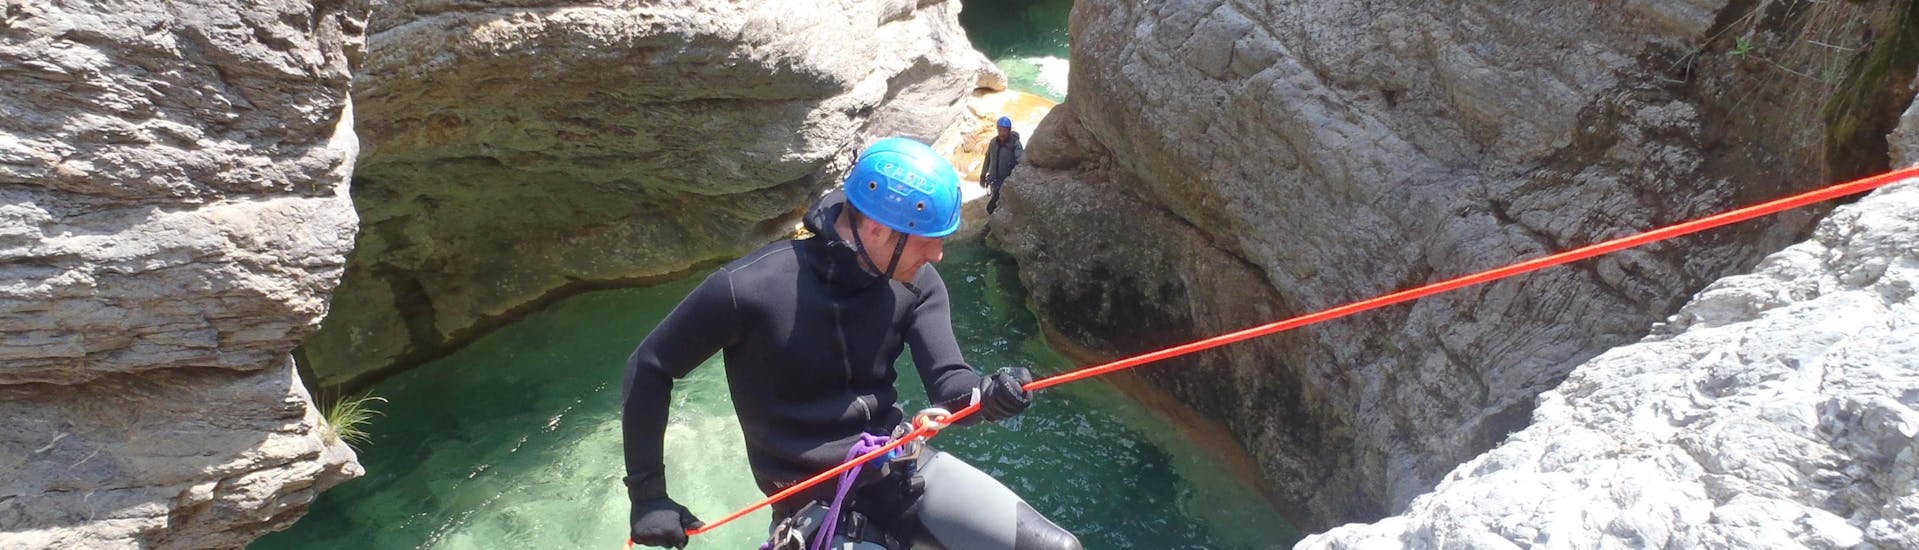 A man is abseiling in Barbaira Canyon during a full day canyoning with Maglia Canyoning.